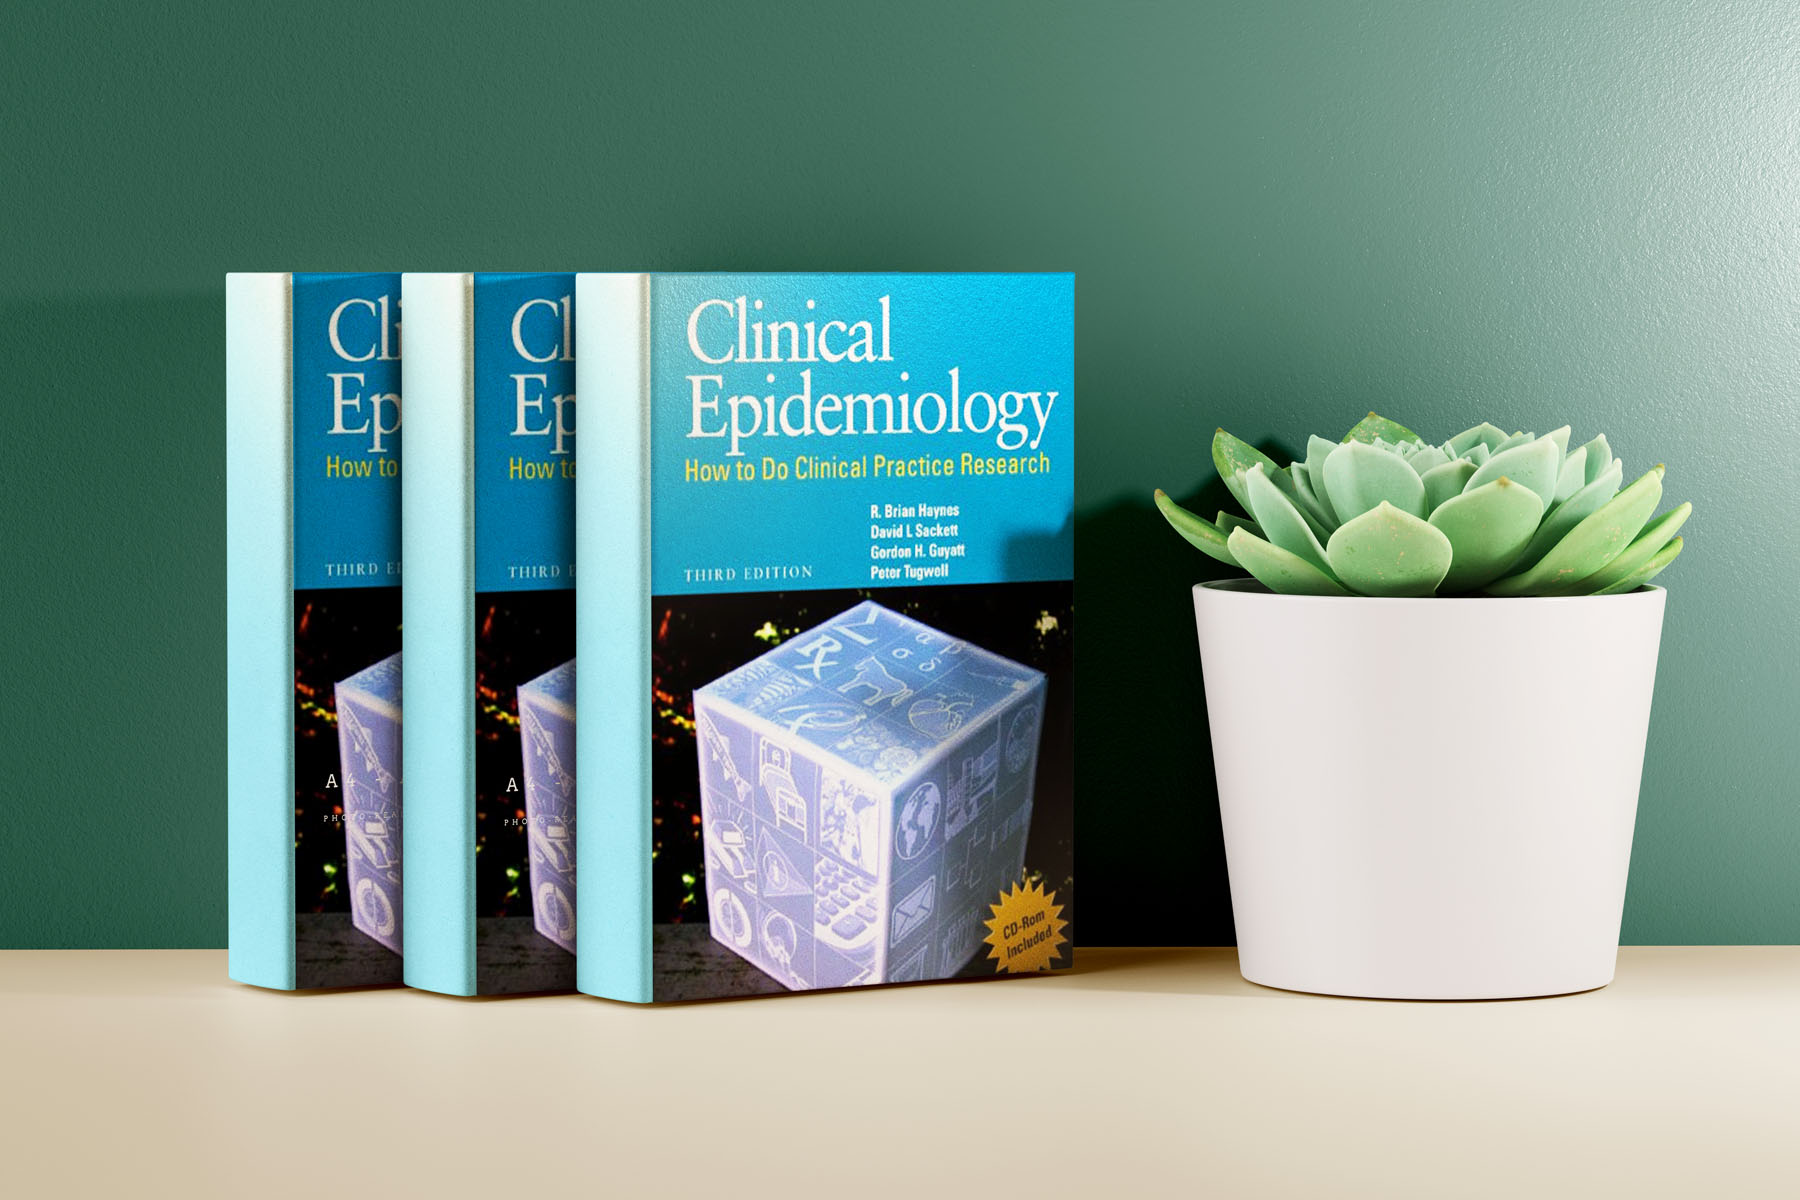 Clinical Epidemiology: How to Do Clinical Practice Research